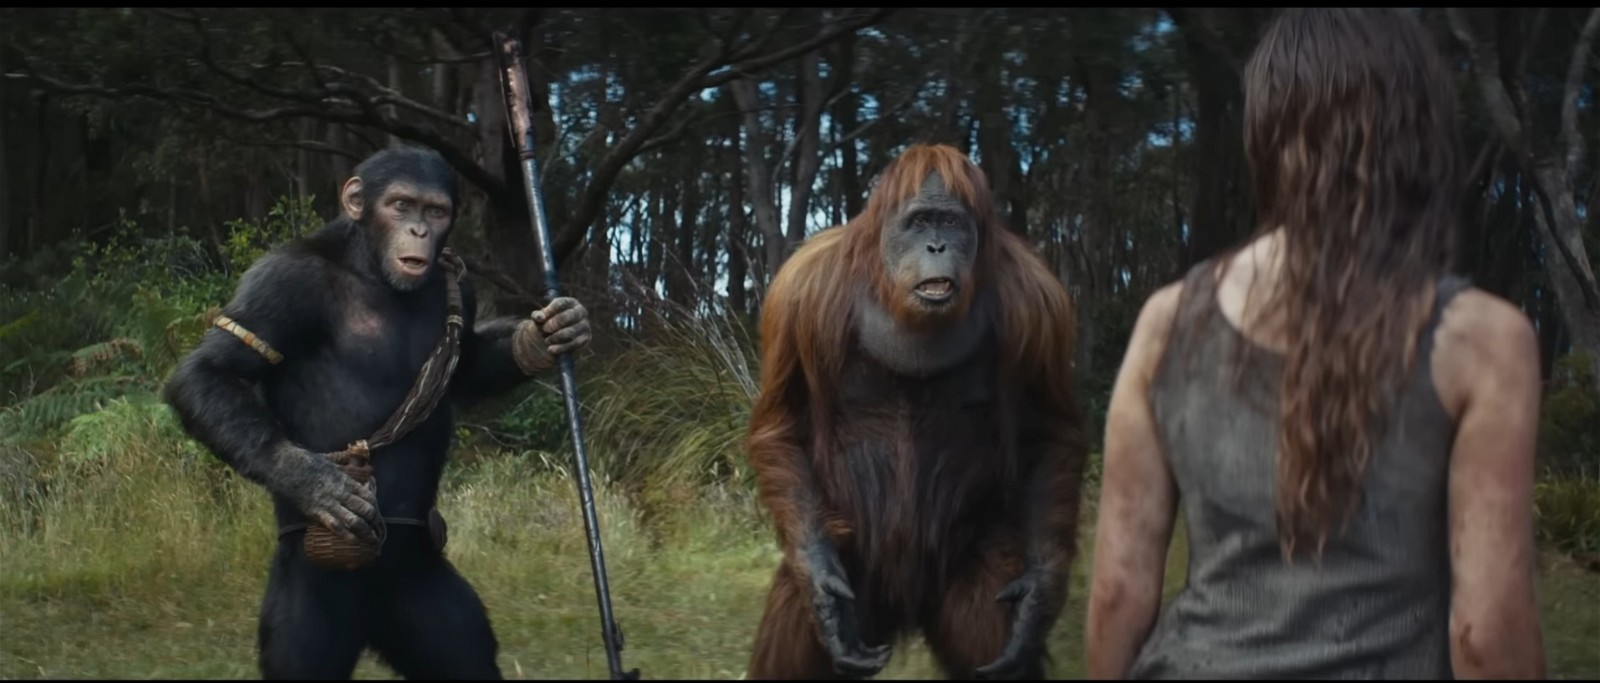 Disney's Kingdom of the Planet of the Apes